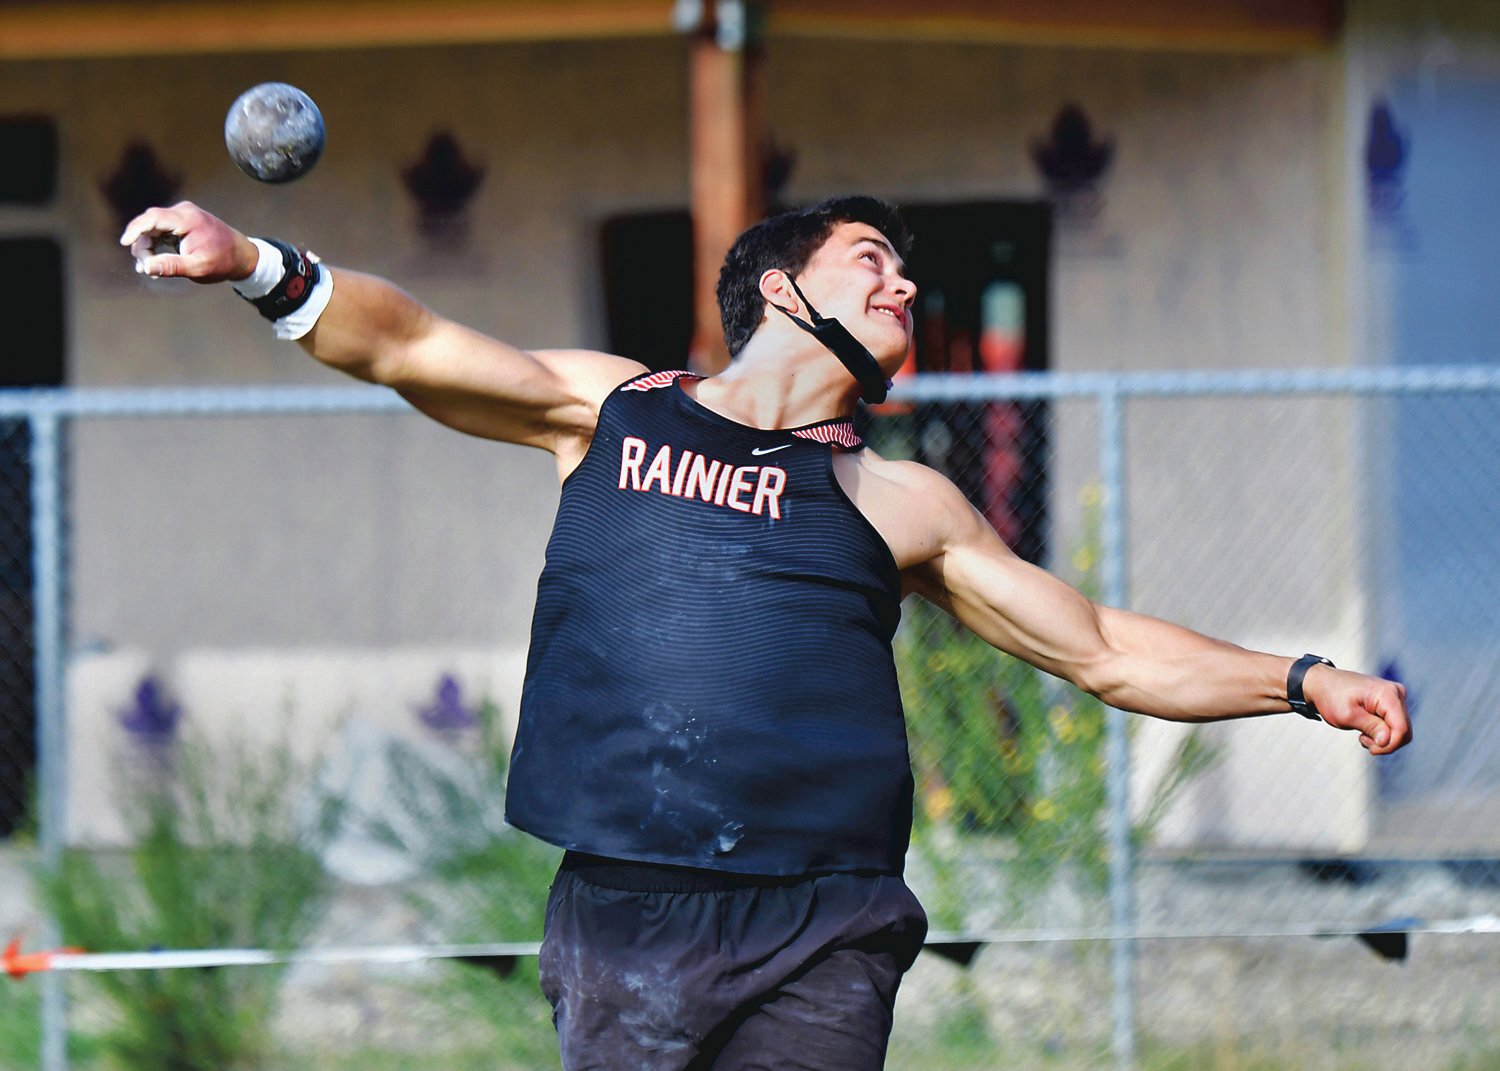 Rainier High School’s Jeremiah Nubbe unleashes a shot put on Thursday, April 29, during the WIAA 2B District 4 Track and Field Championships at Rainier High School.